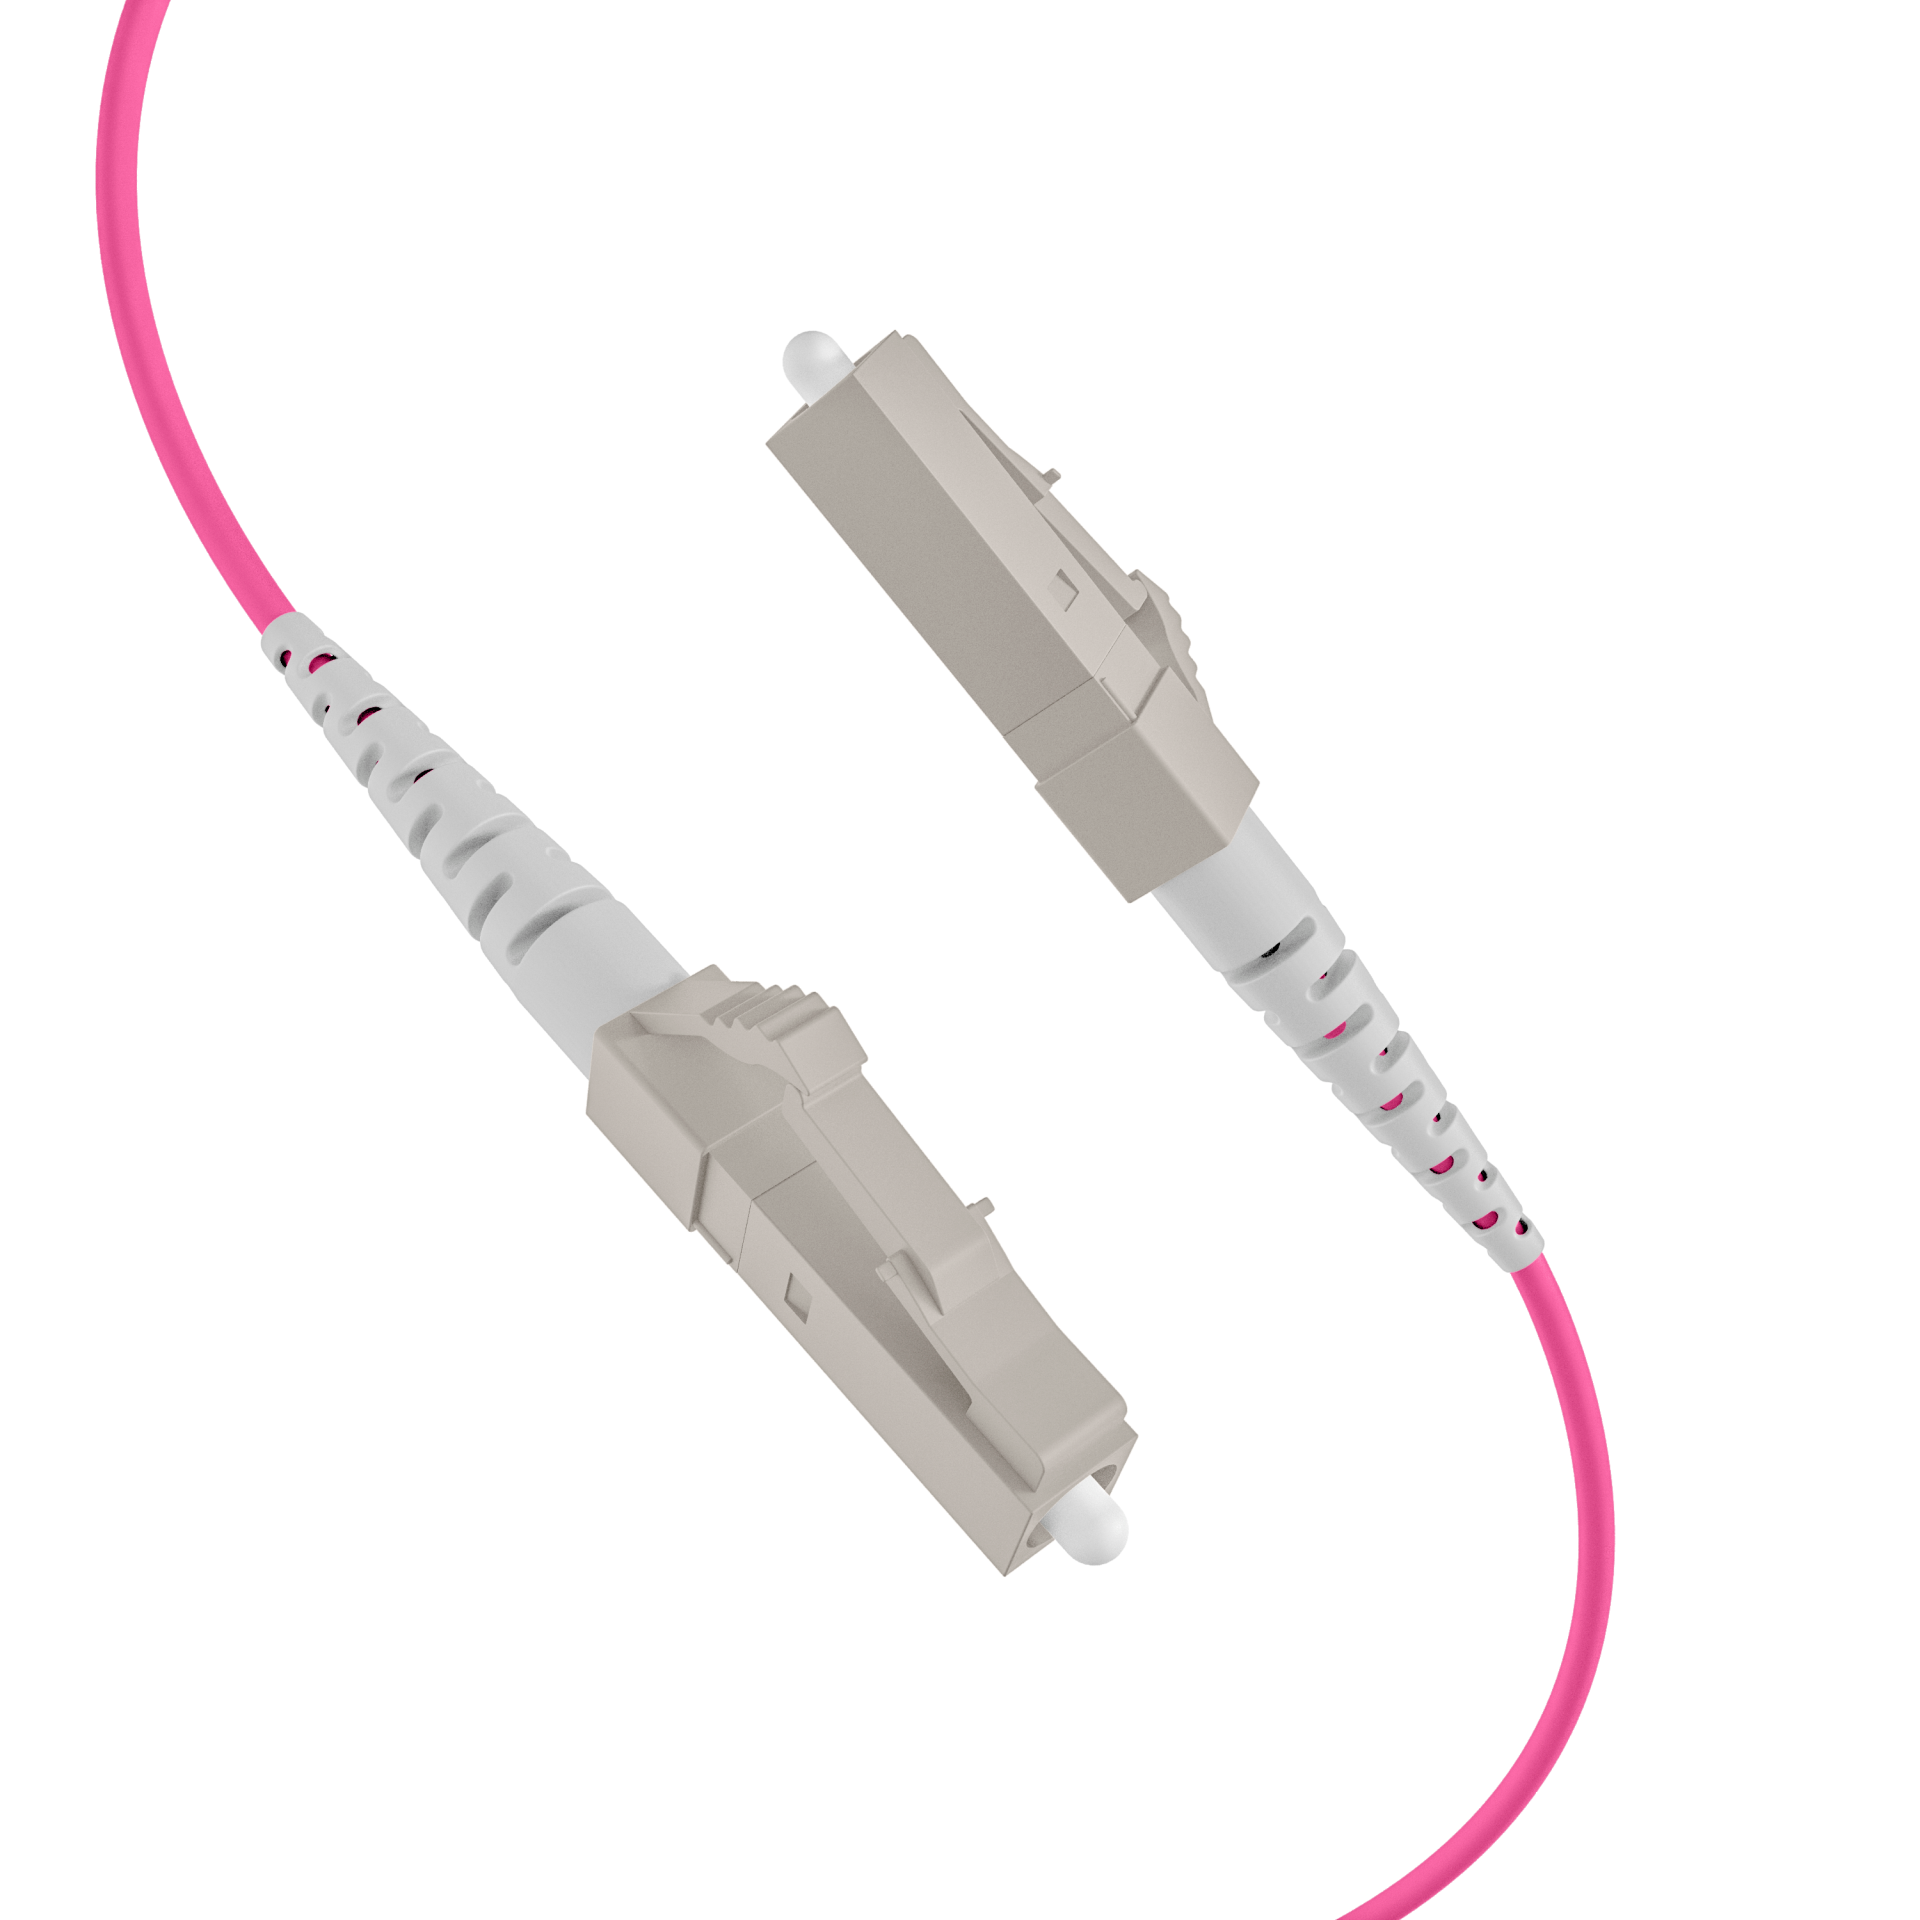 Trunkcable U-DQ(ZN)BH OM4 8G (1x8) LC-LC,90m Dca LSZH